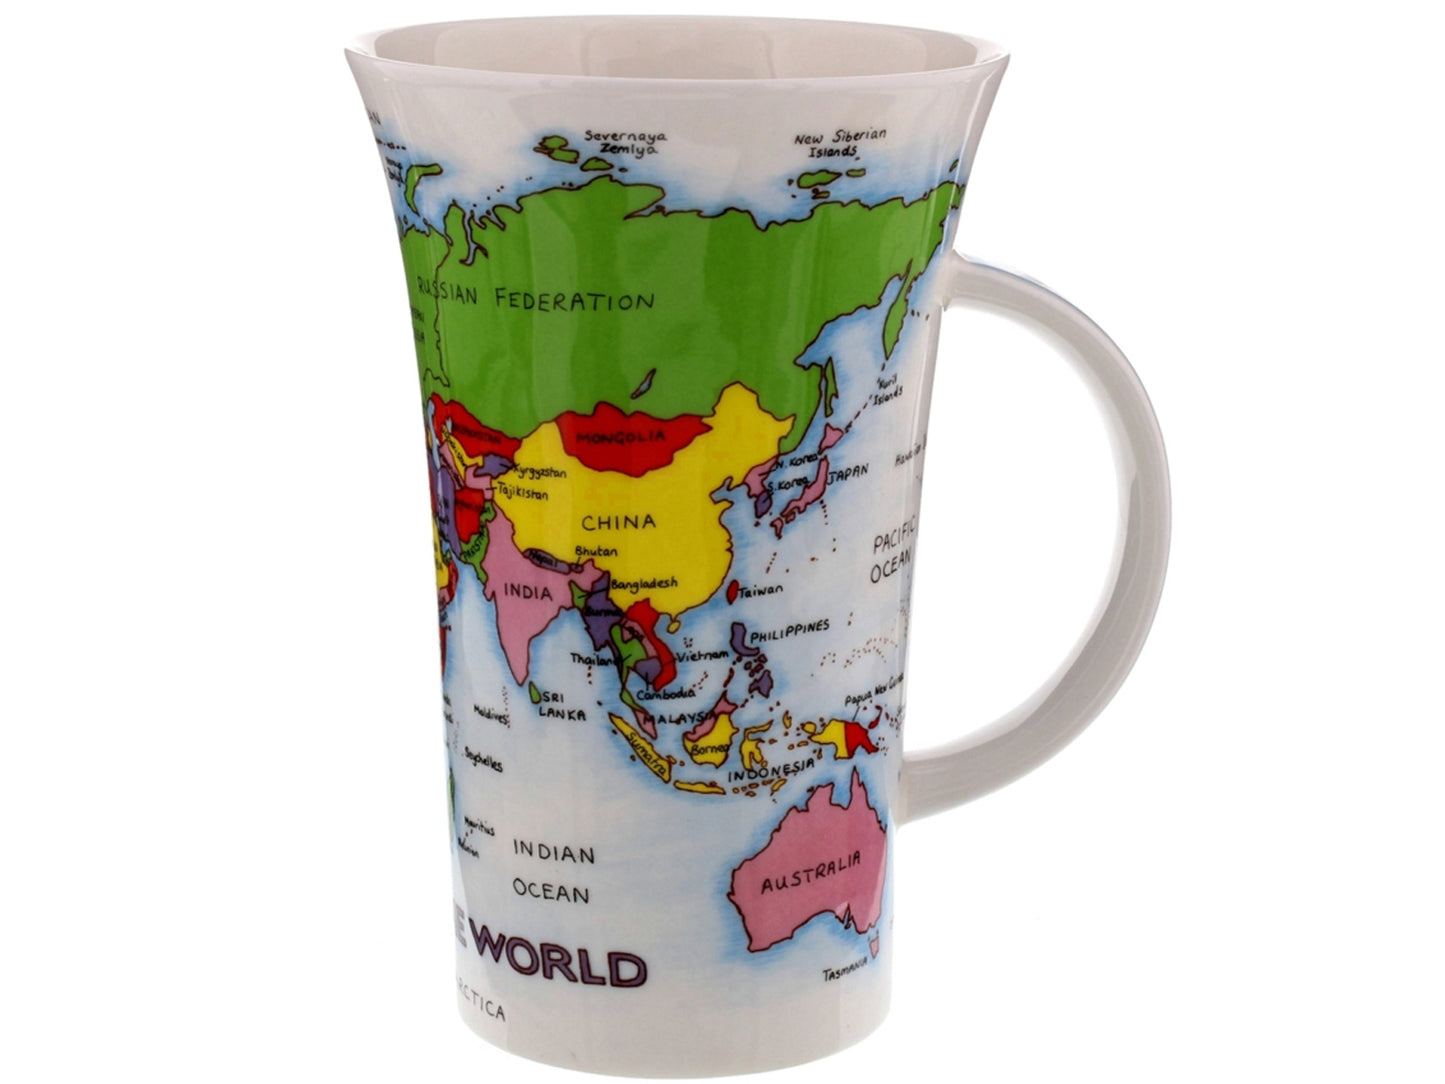 Dunoon Glencoe Map Of The World Mug is a large fine bone china mug that has a colourful,. fully-labelled map of the seven continents printed across its exterior, as well as their adjoining oceans on a white background.